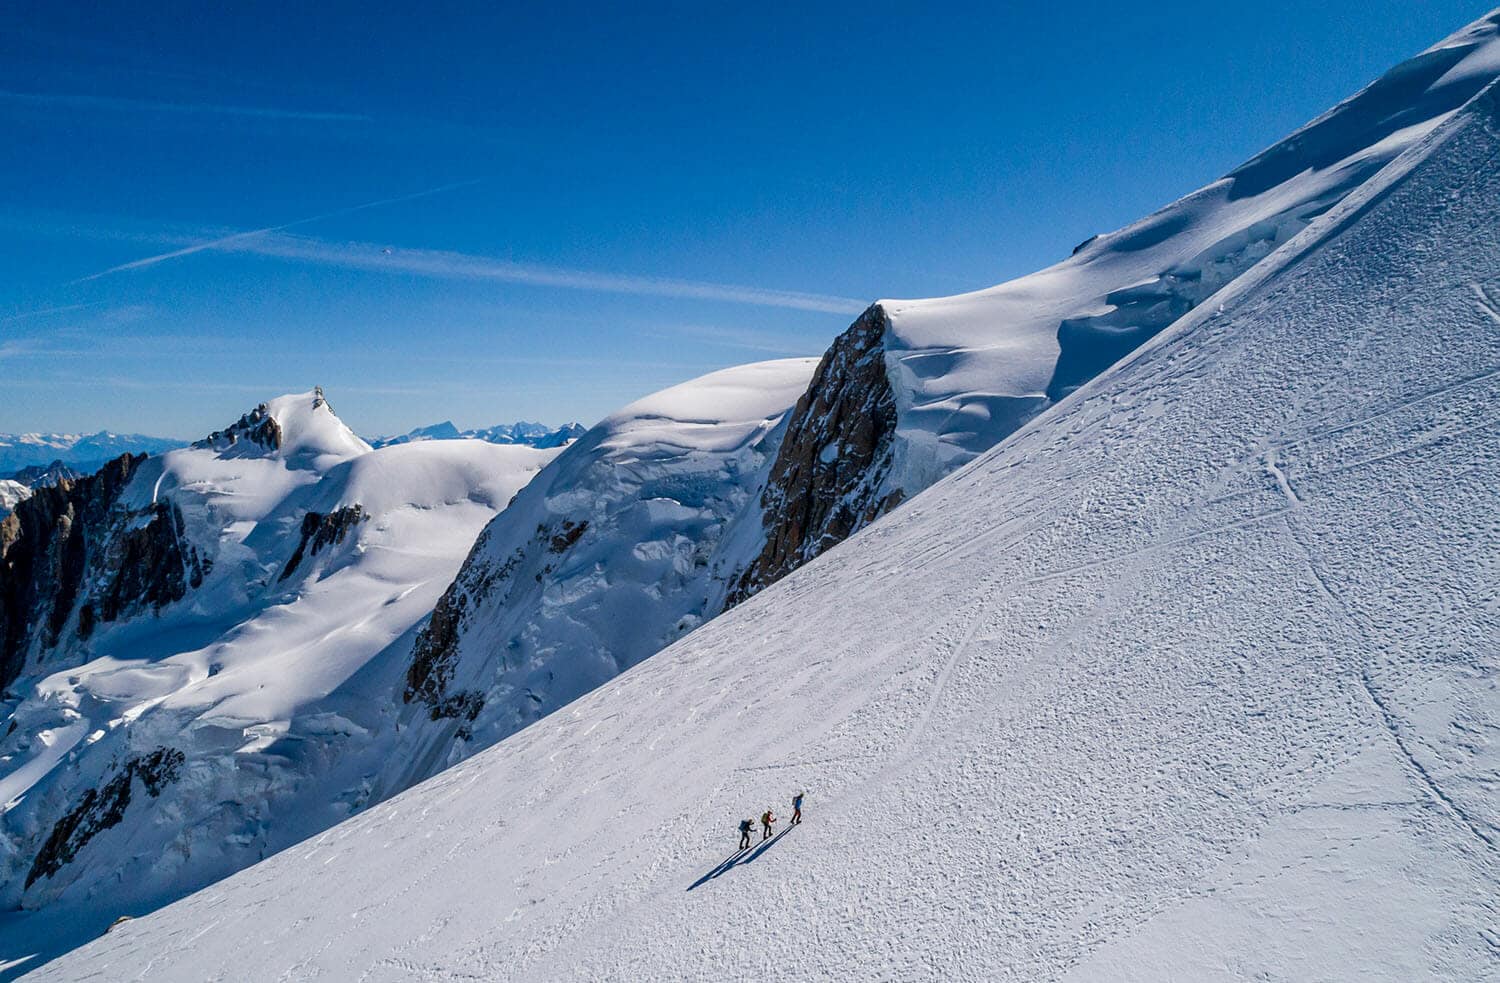 Dutch drone team on the Mont Blanc in France